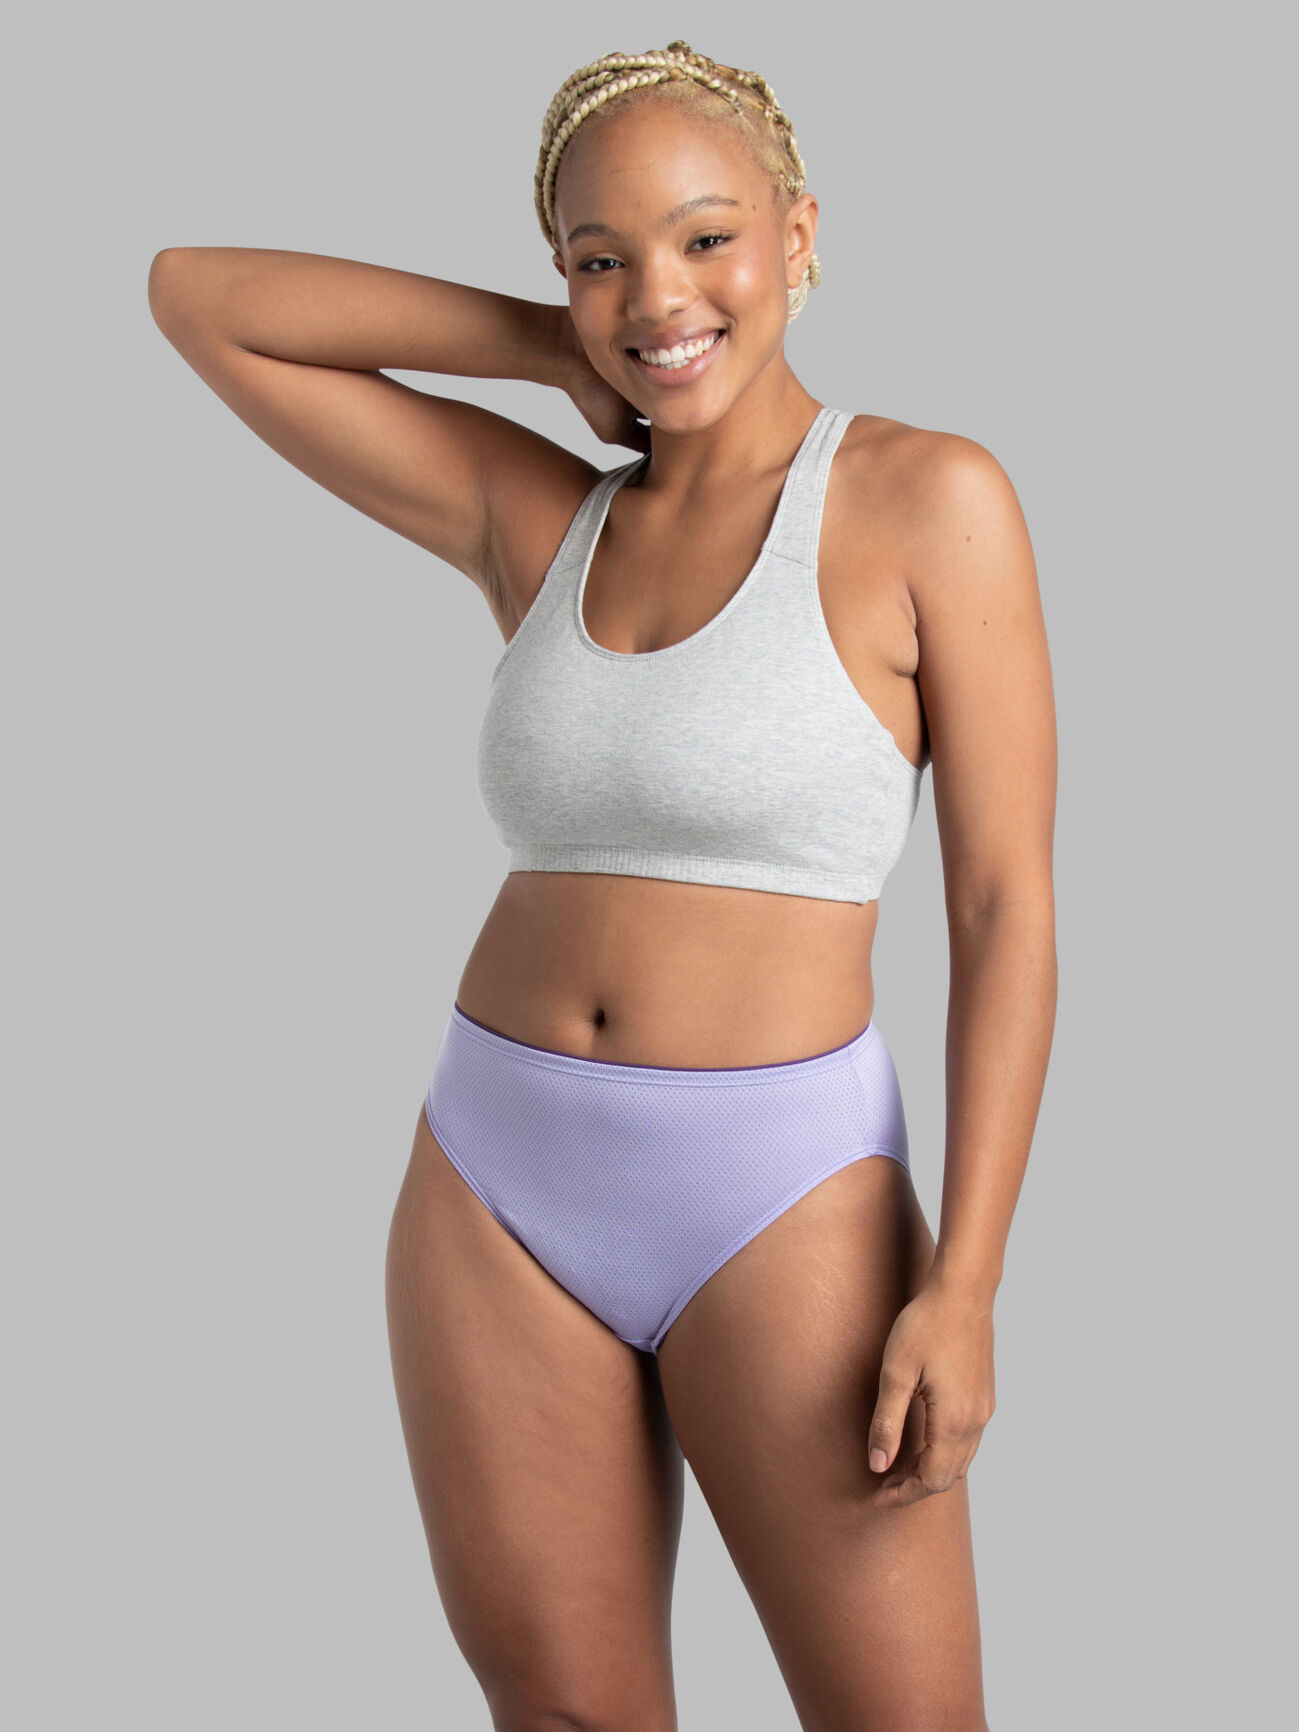 MED - Blue is the coolest color. Our new Kelly underwear